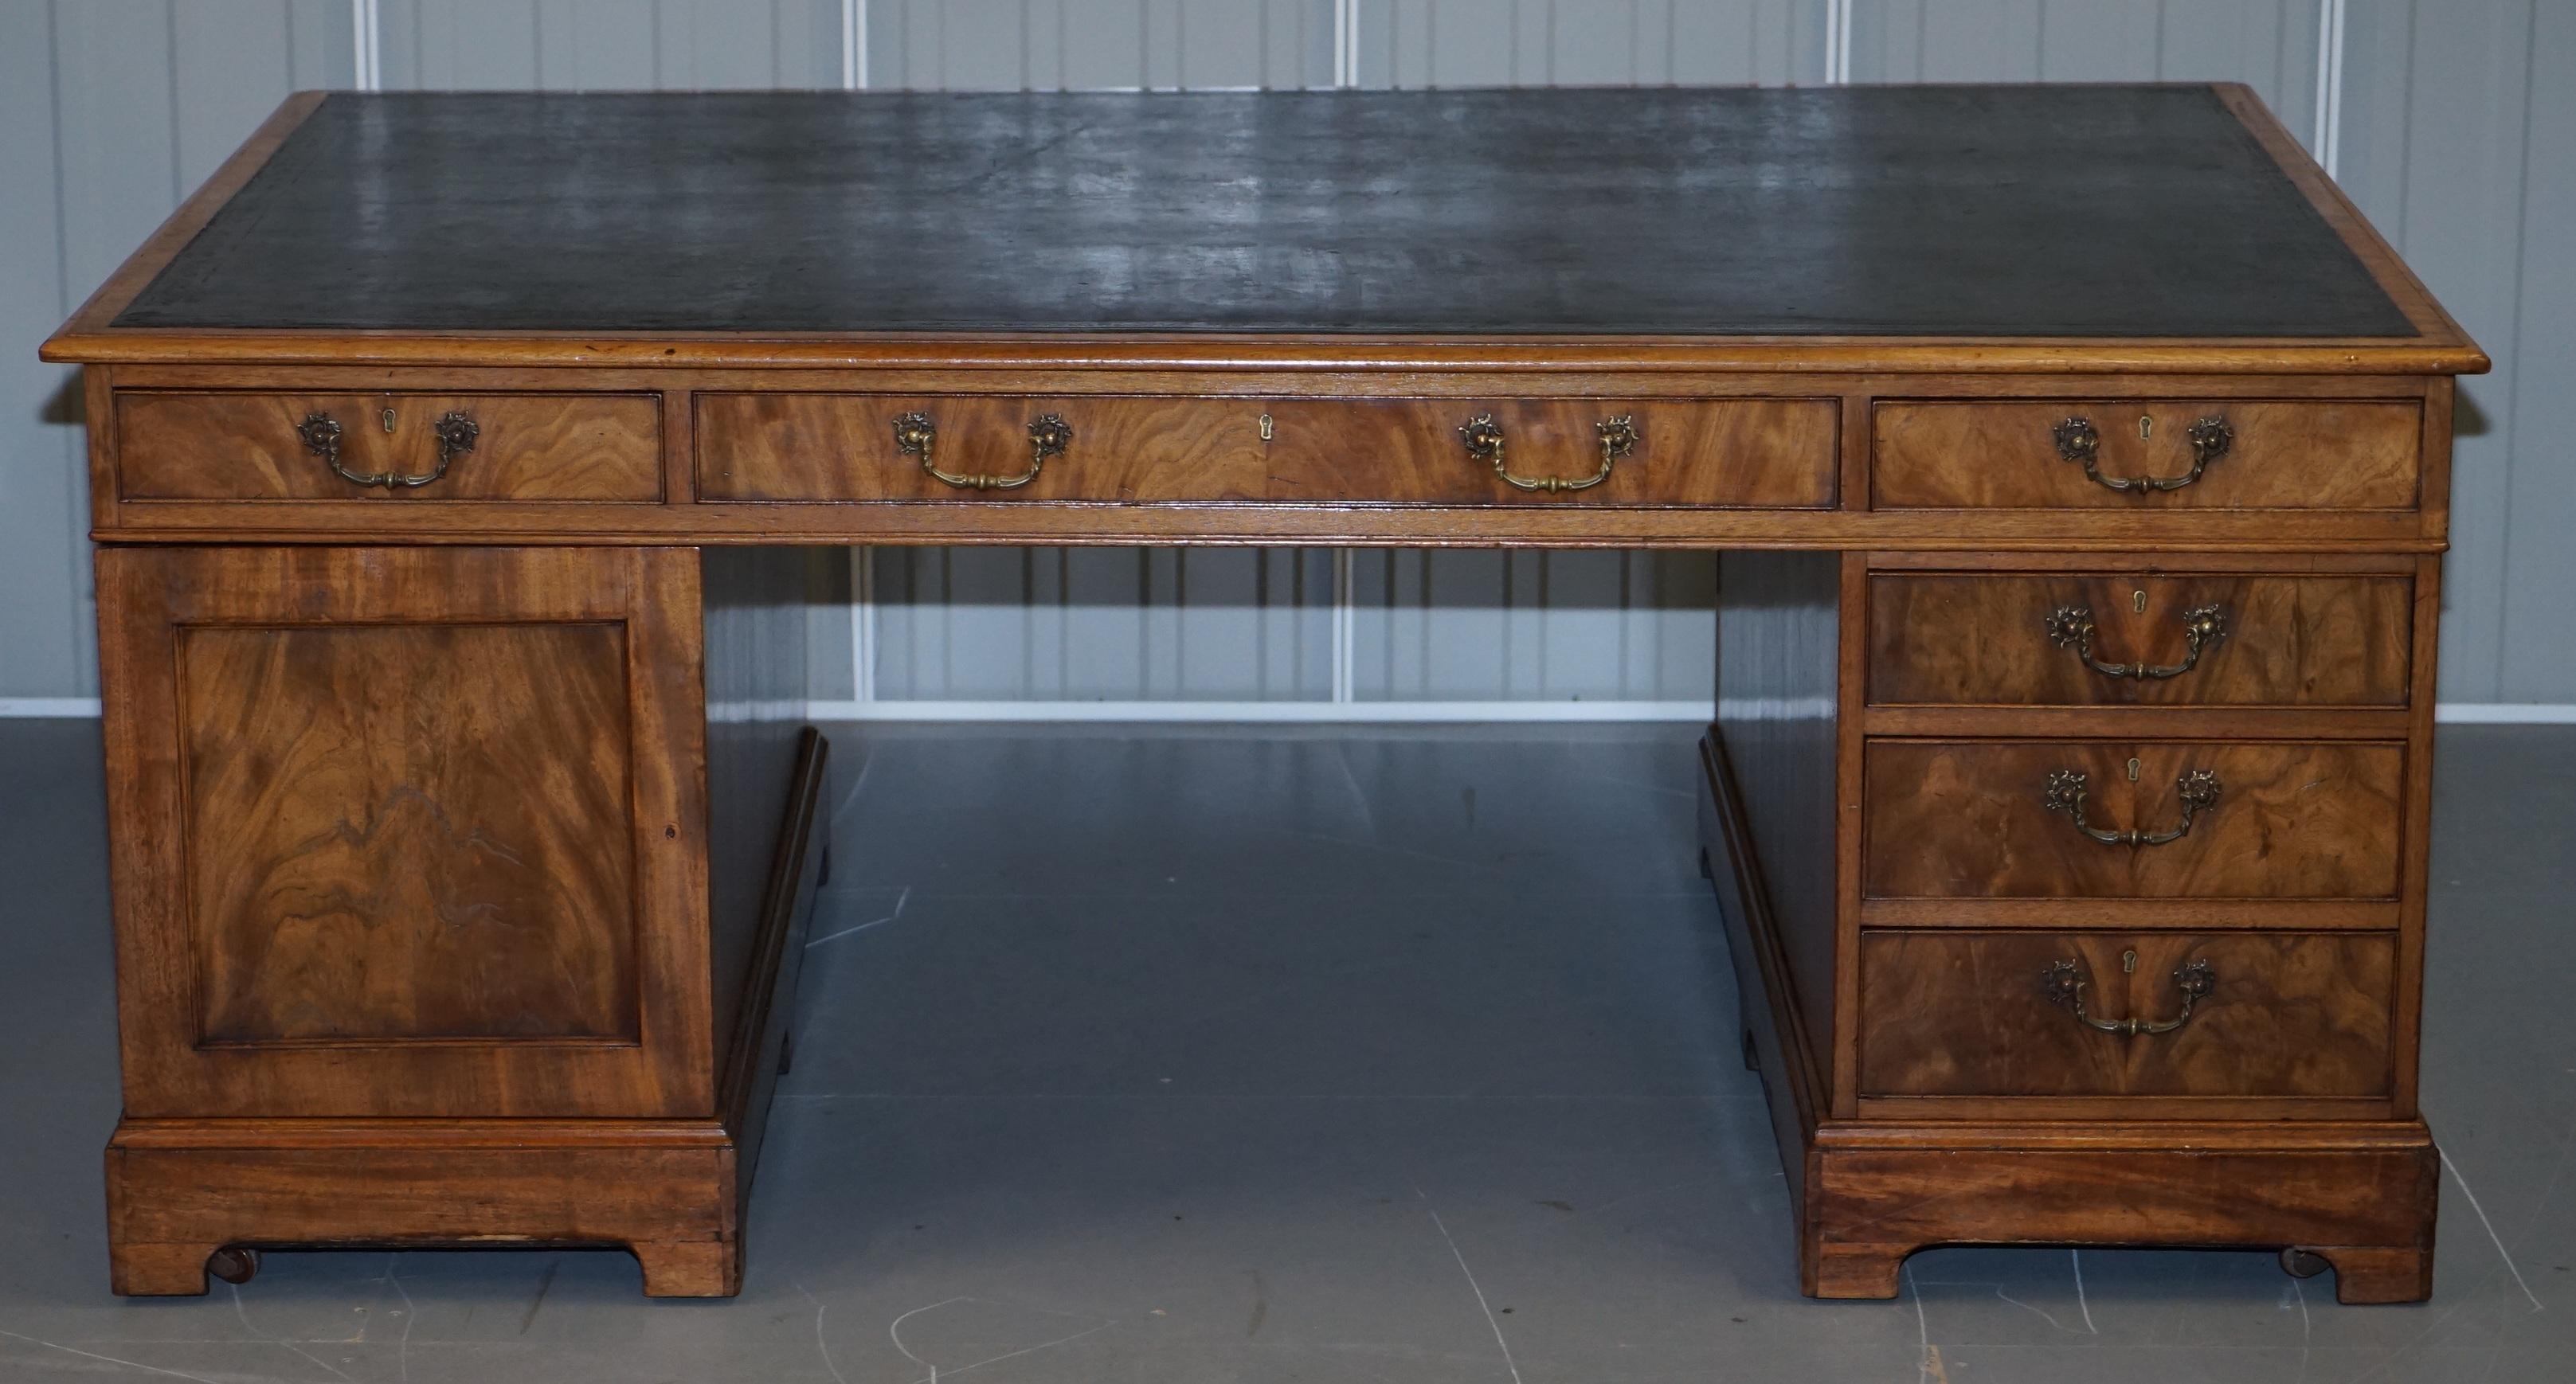 Wimbledon-Furniture

Wimbledon-Furniture is delighted to offer for sale this very rare original 12 drawer 2 cupboard Georgian Campaign mahogany luxury premium twin pedestal partner desk with dark leather writing surface and gold leaf embossed